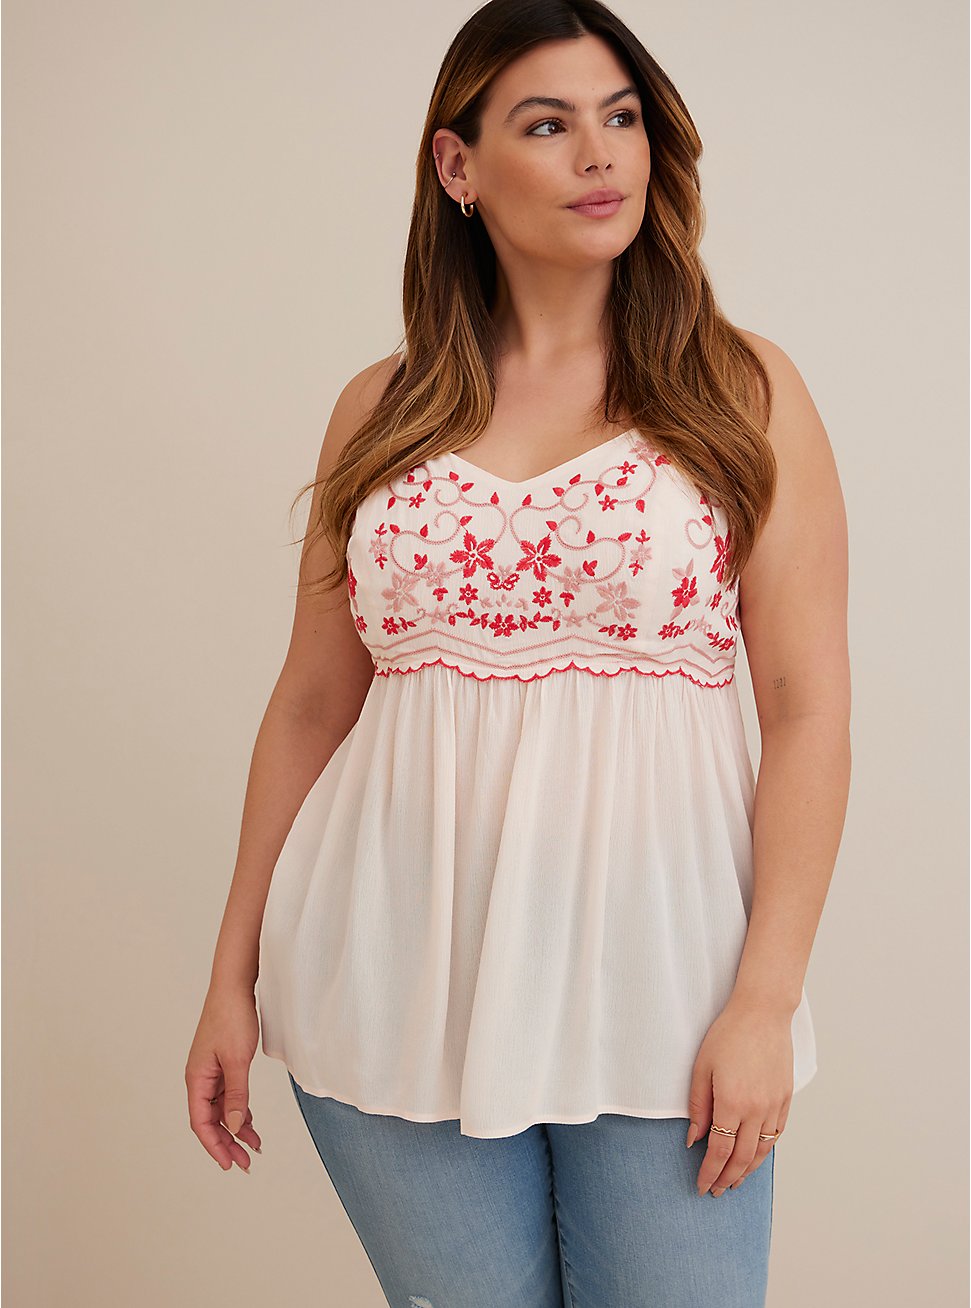 Embroidered Babydoll Top - Gauze Blush & Red, BLUSH, hi-res